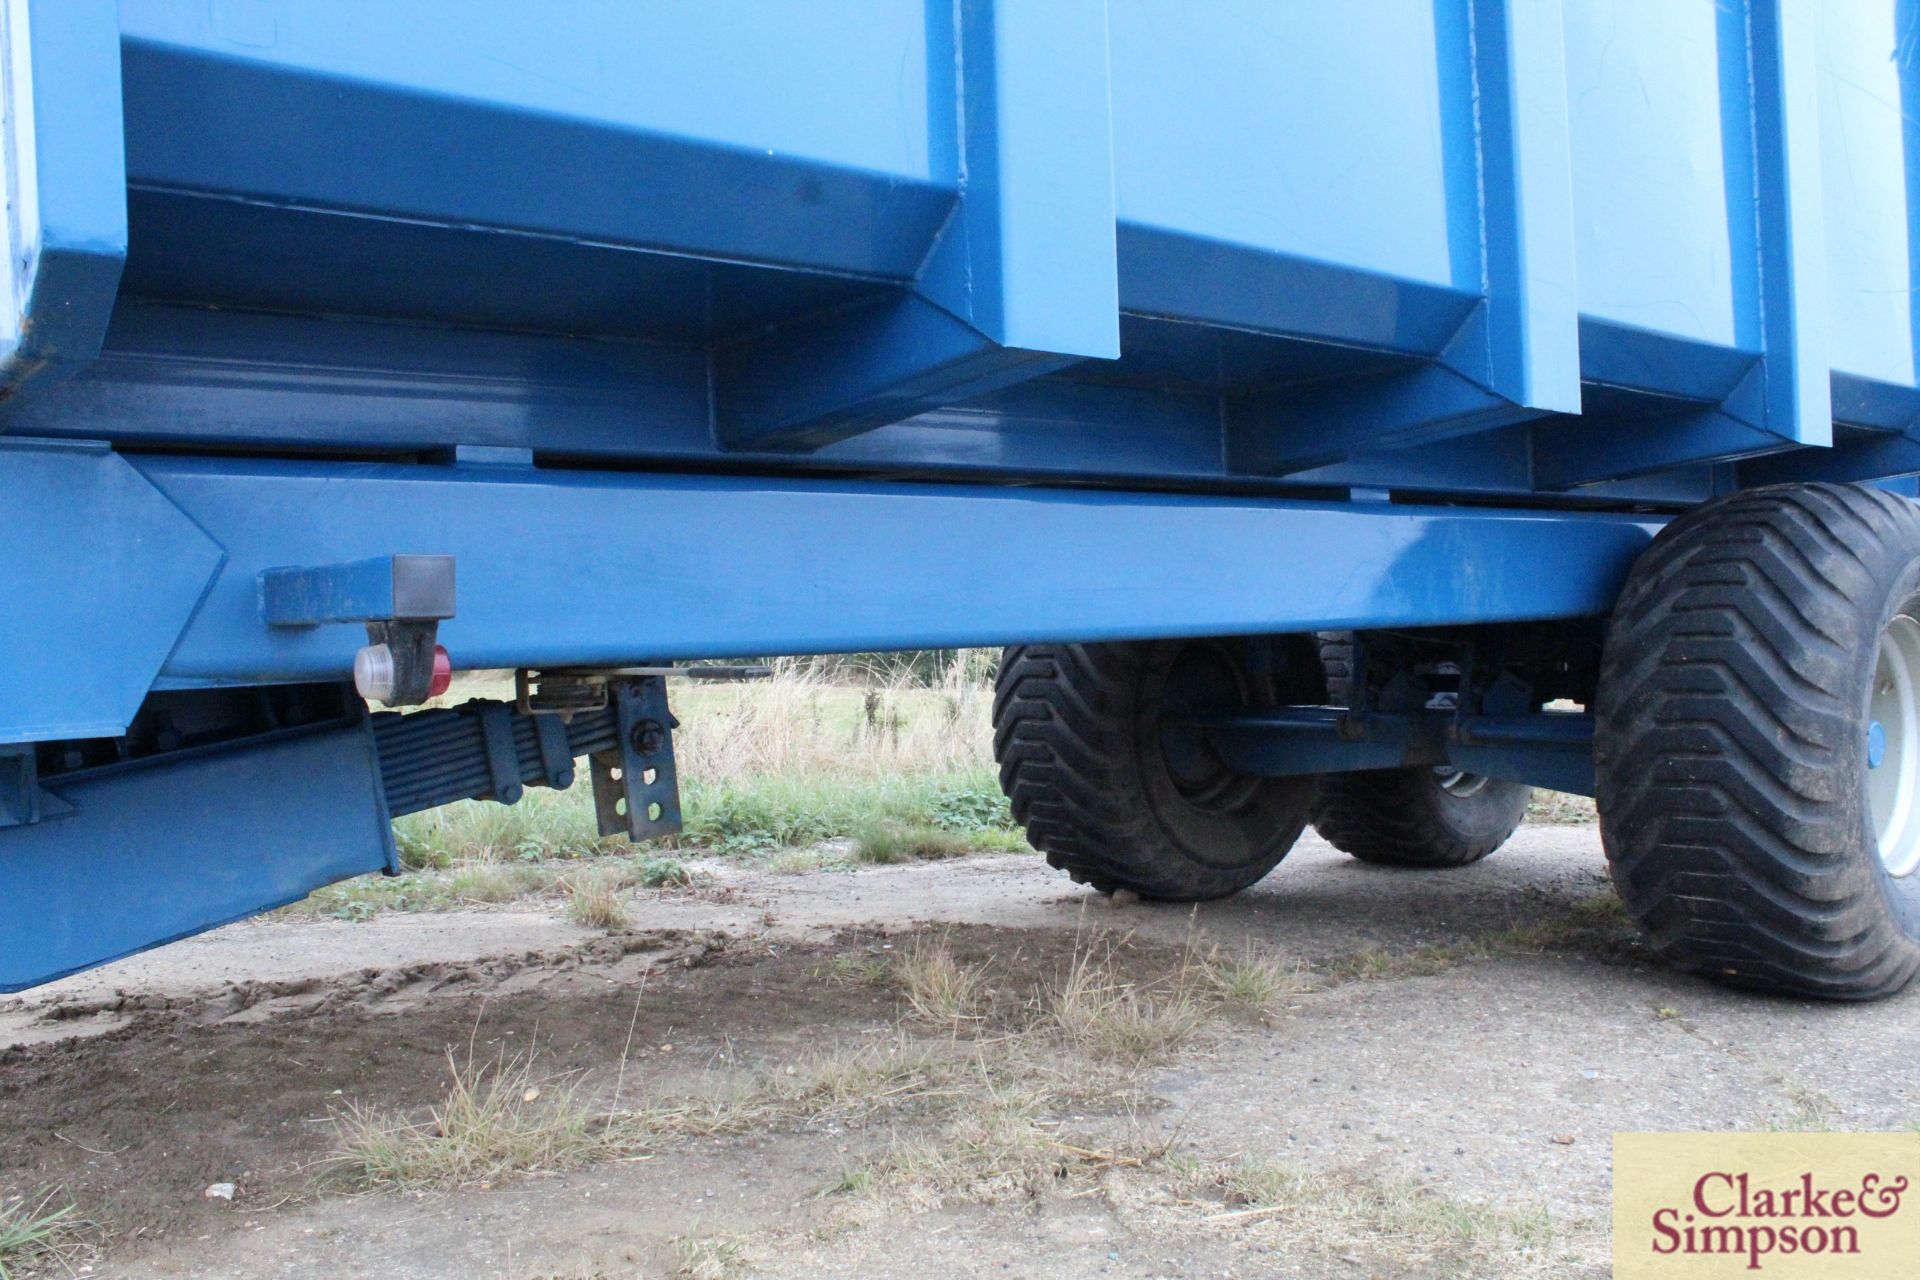 AS Marston ACE14D 14T twin axle dump trailer. 03/2011. Serial number 217341. With oil brakes, - Image 22 of 26